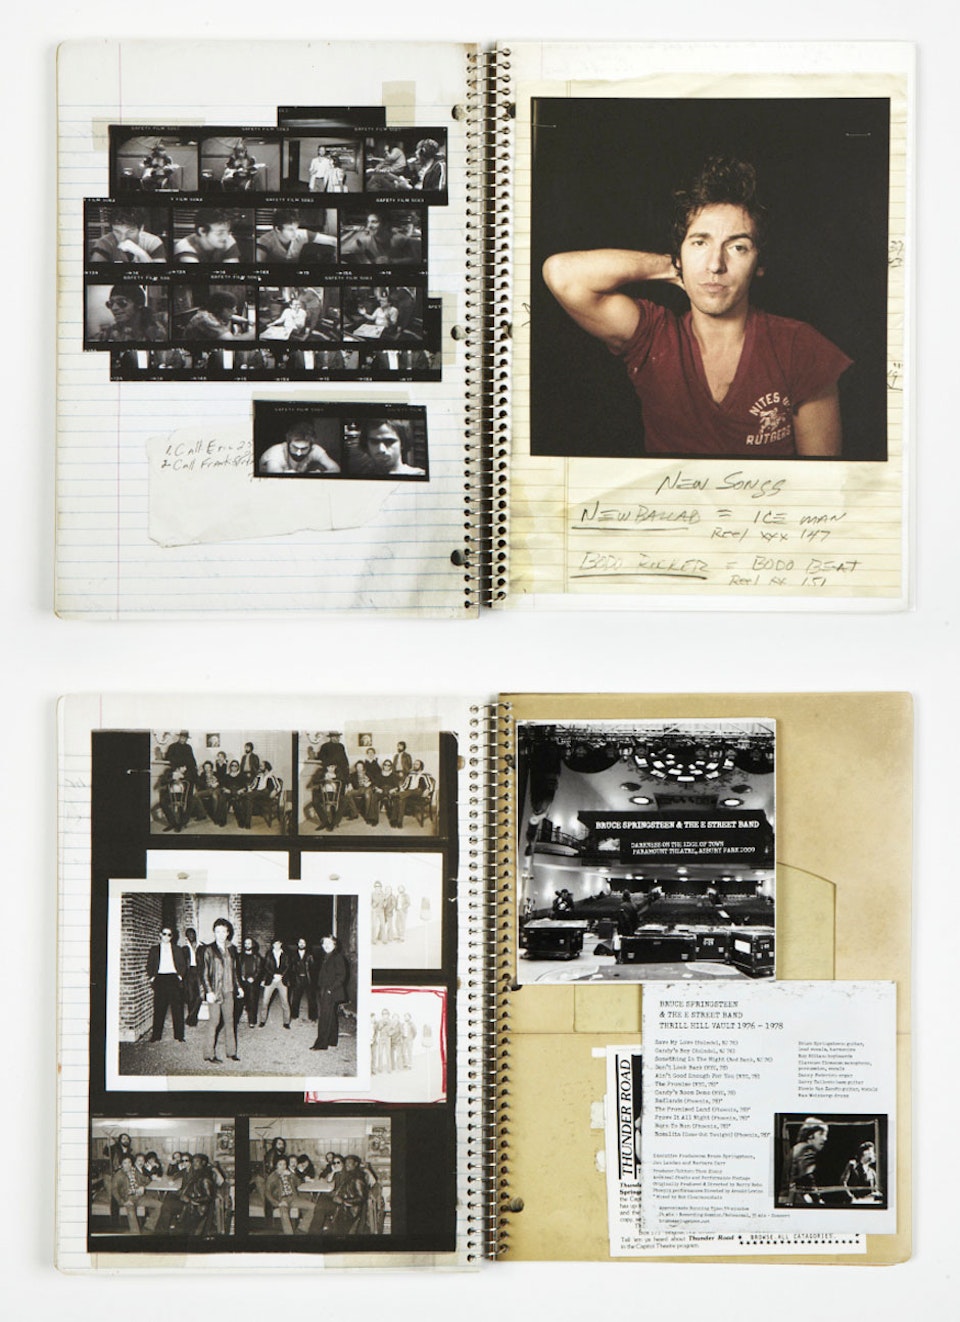 Grammy winning Darkness on the Edge of Town - Notebook spreads